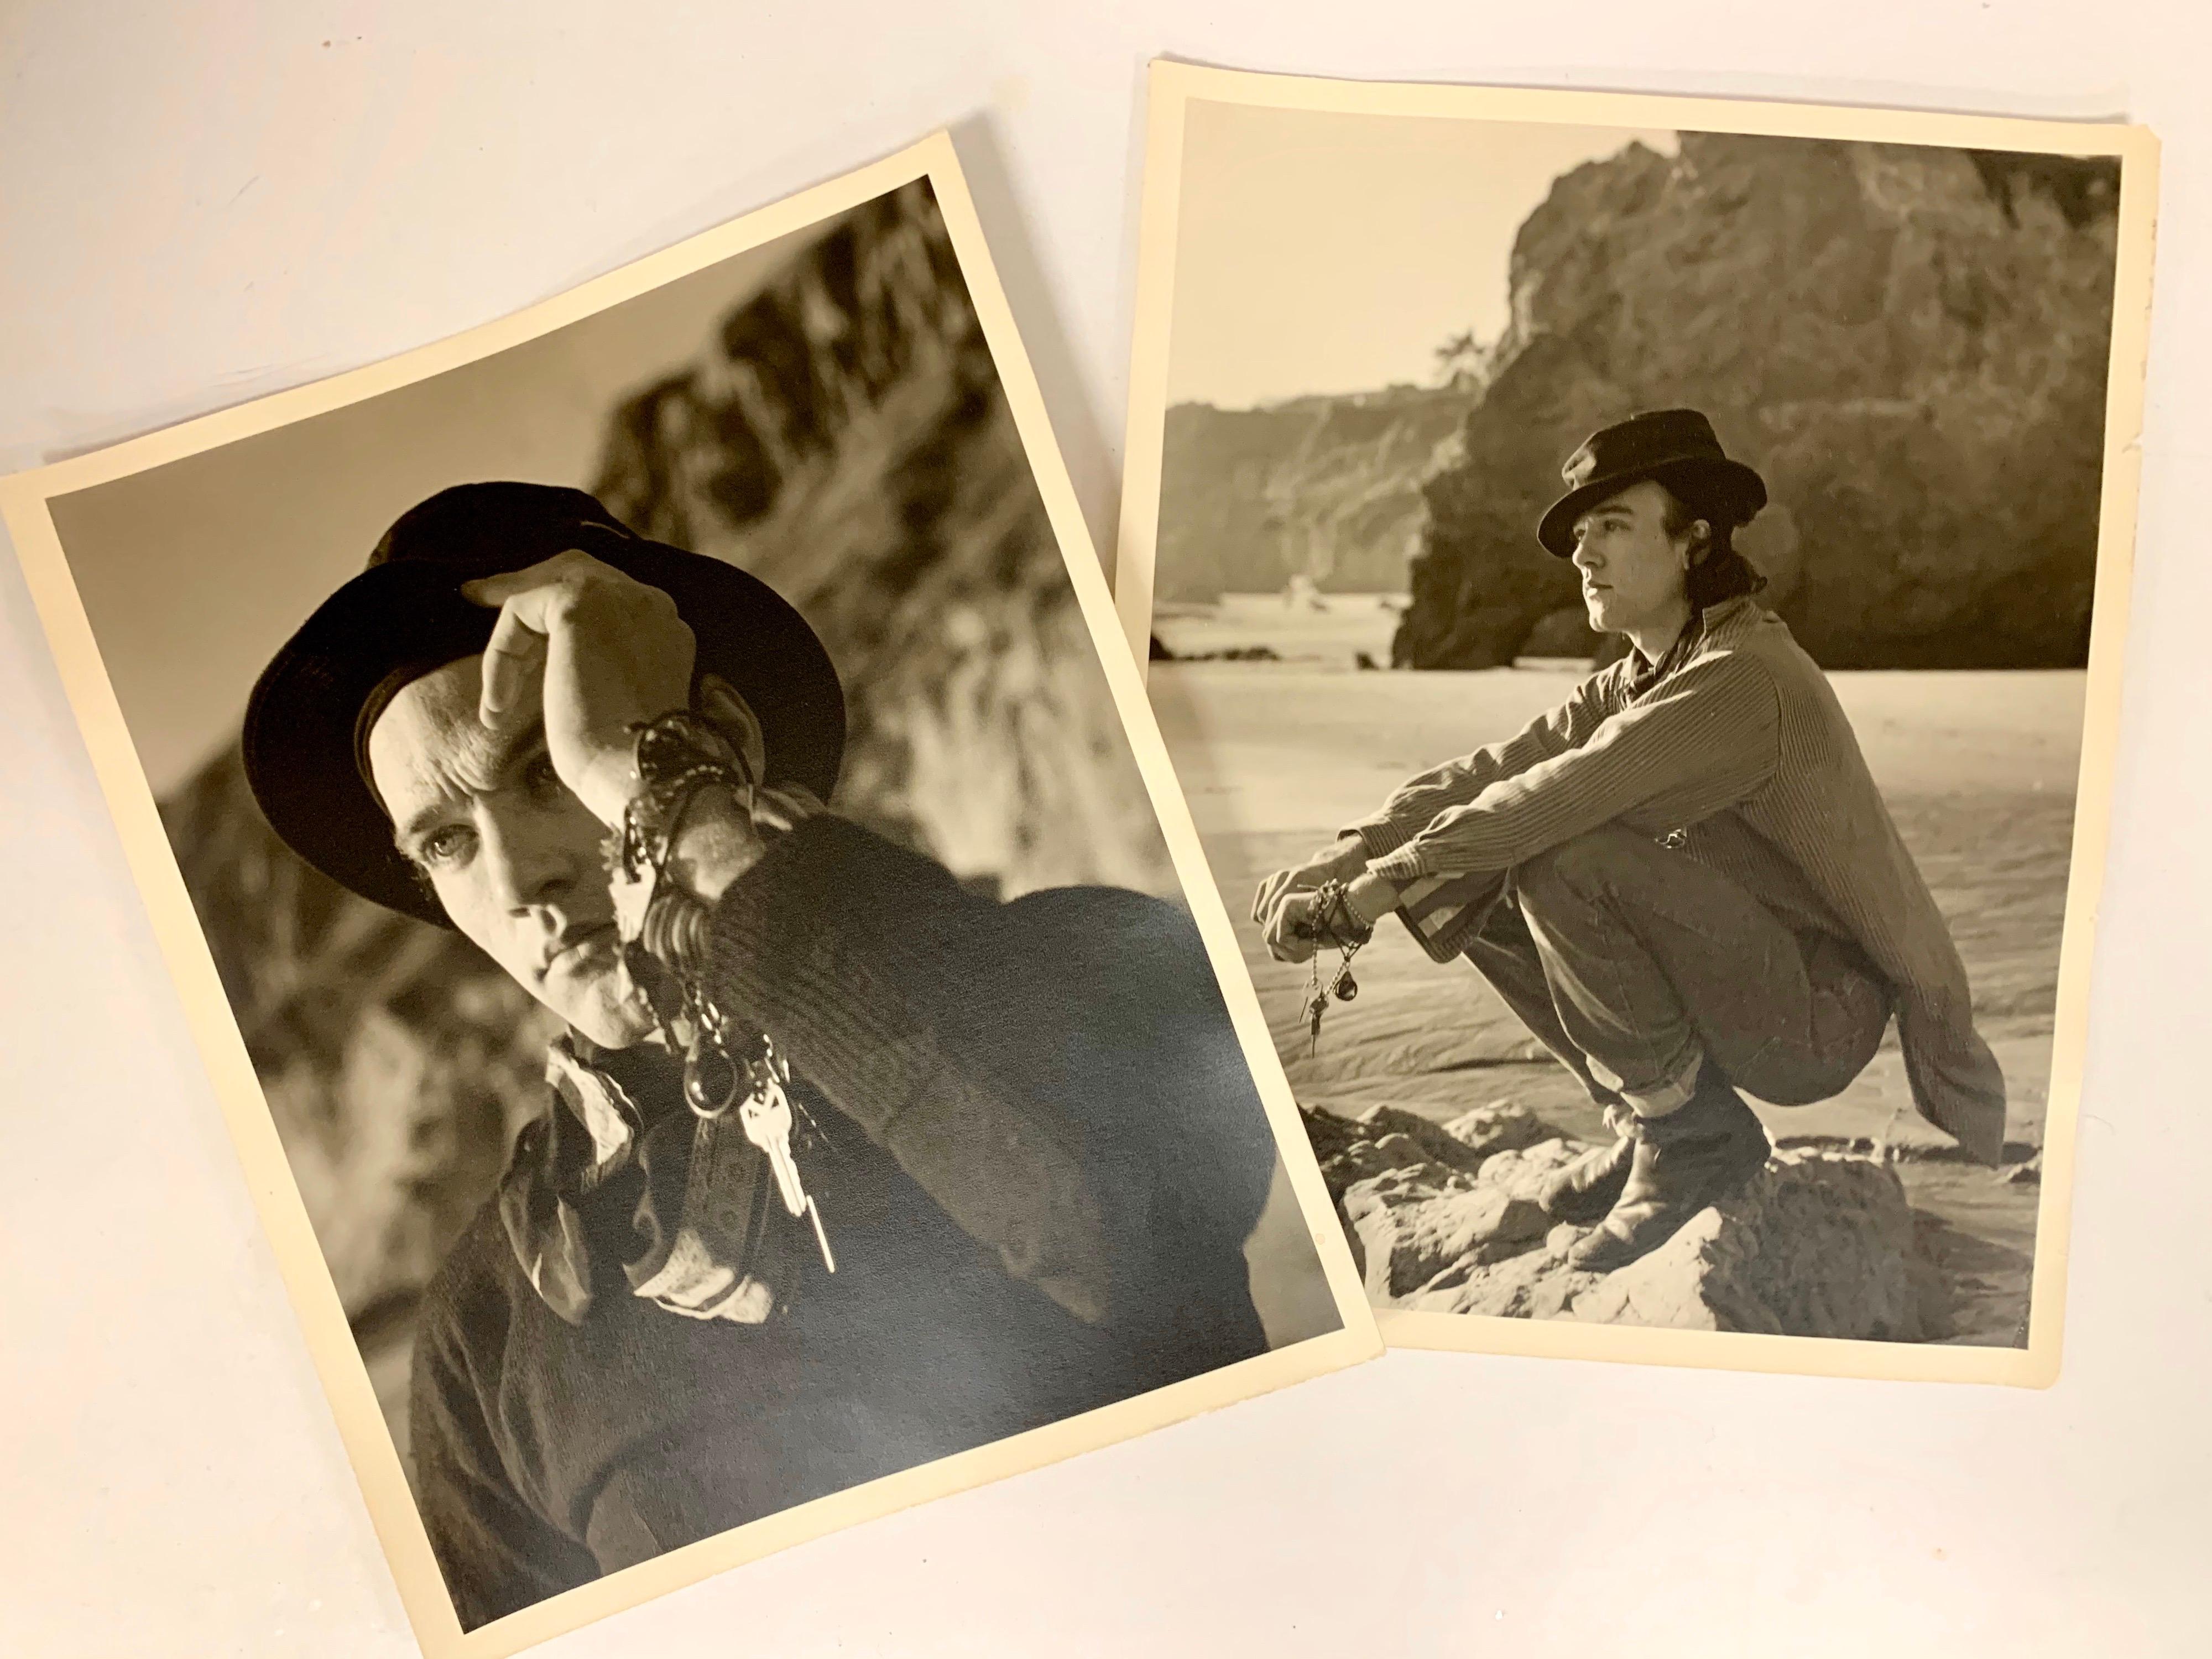 Rare set of original Bruce Weber photographs - not prints. These have provenance on back as detailed in photo suite below. The photos were taken by Mr. Weber in Los Angeles in 1987 as detailed by the artist.

Mr Weber signed them and also writes: